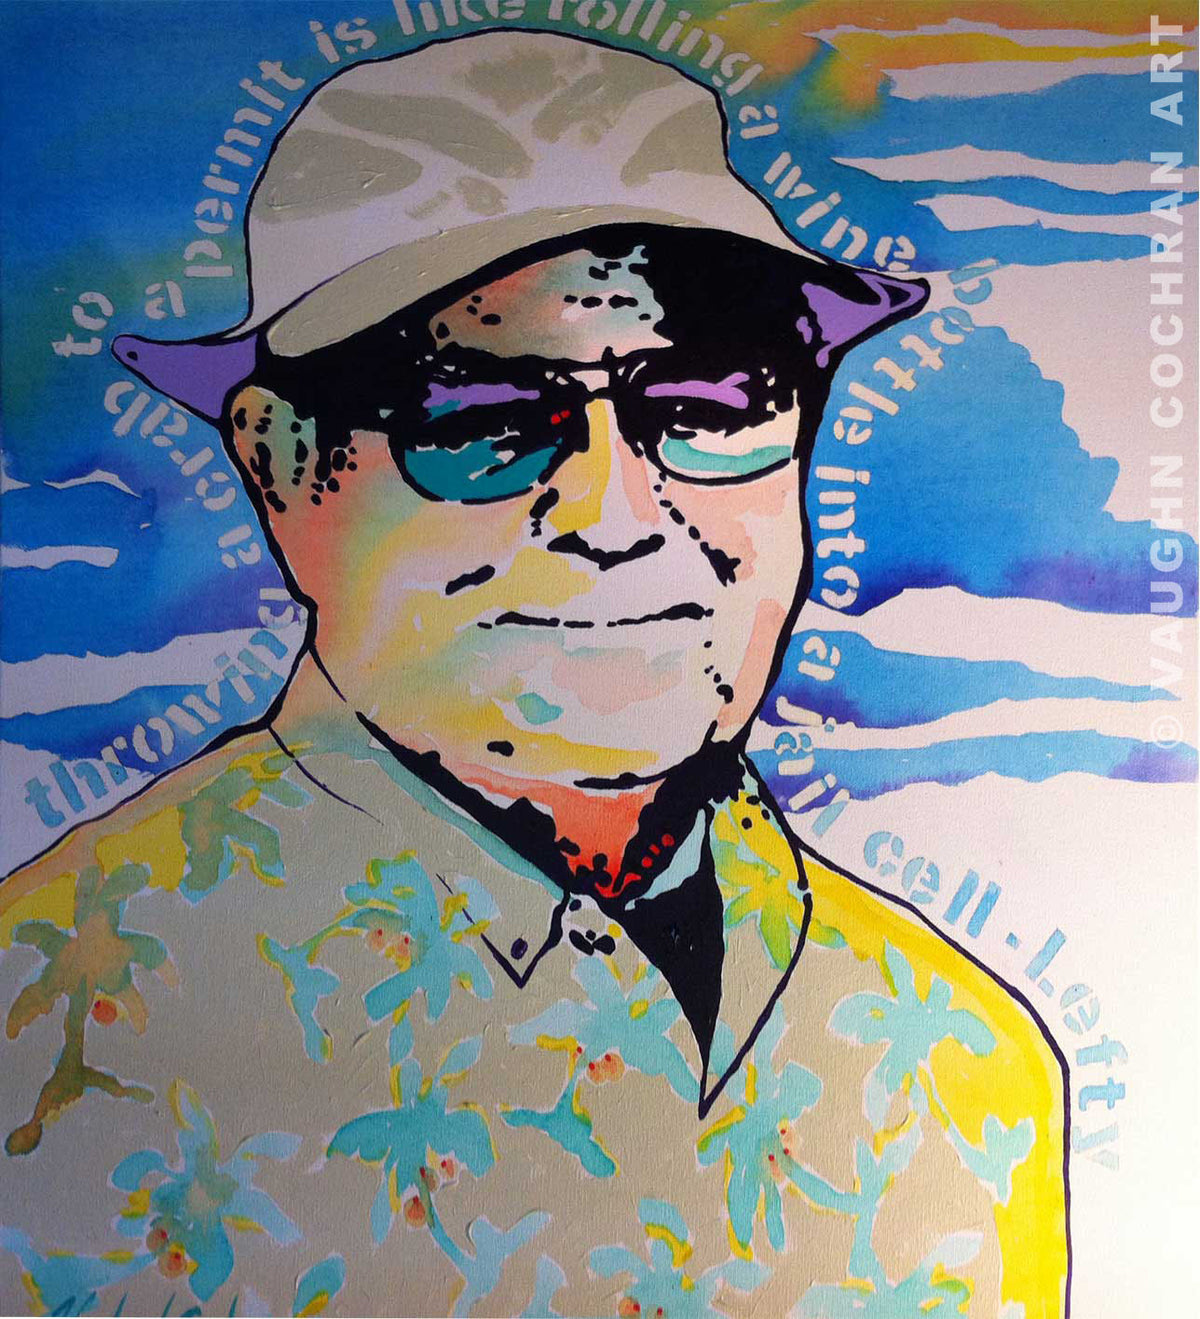 Lefty Kreh Portrait<br /><span style='color:#f00;font-weight:bold;'>NOT FOR SALE</span>